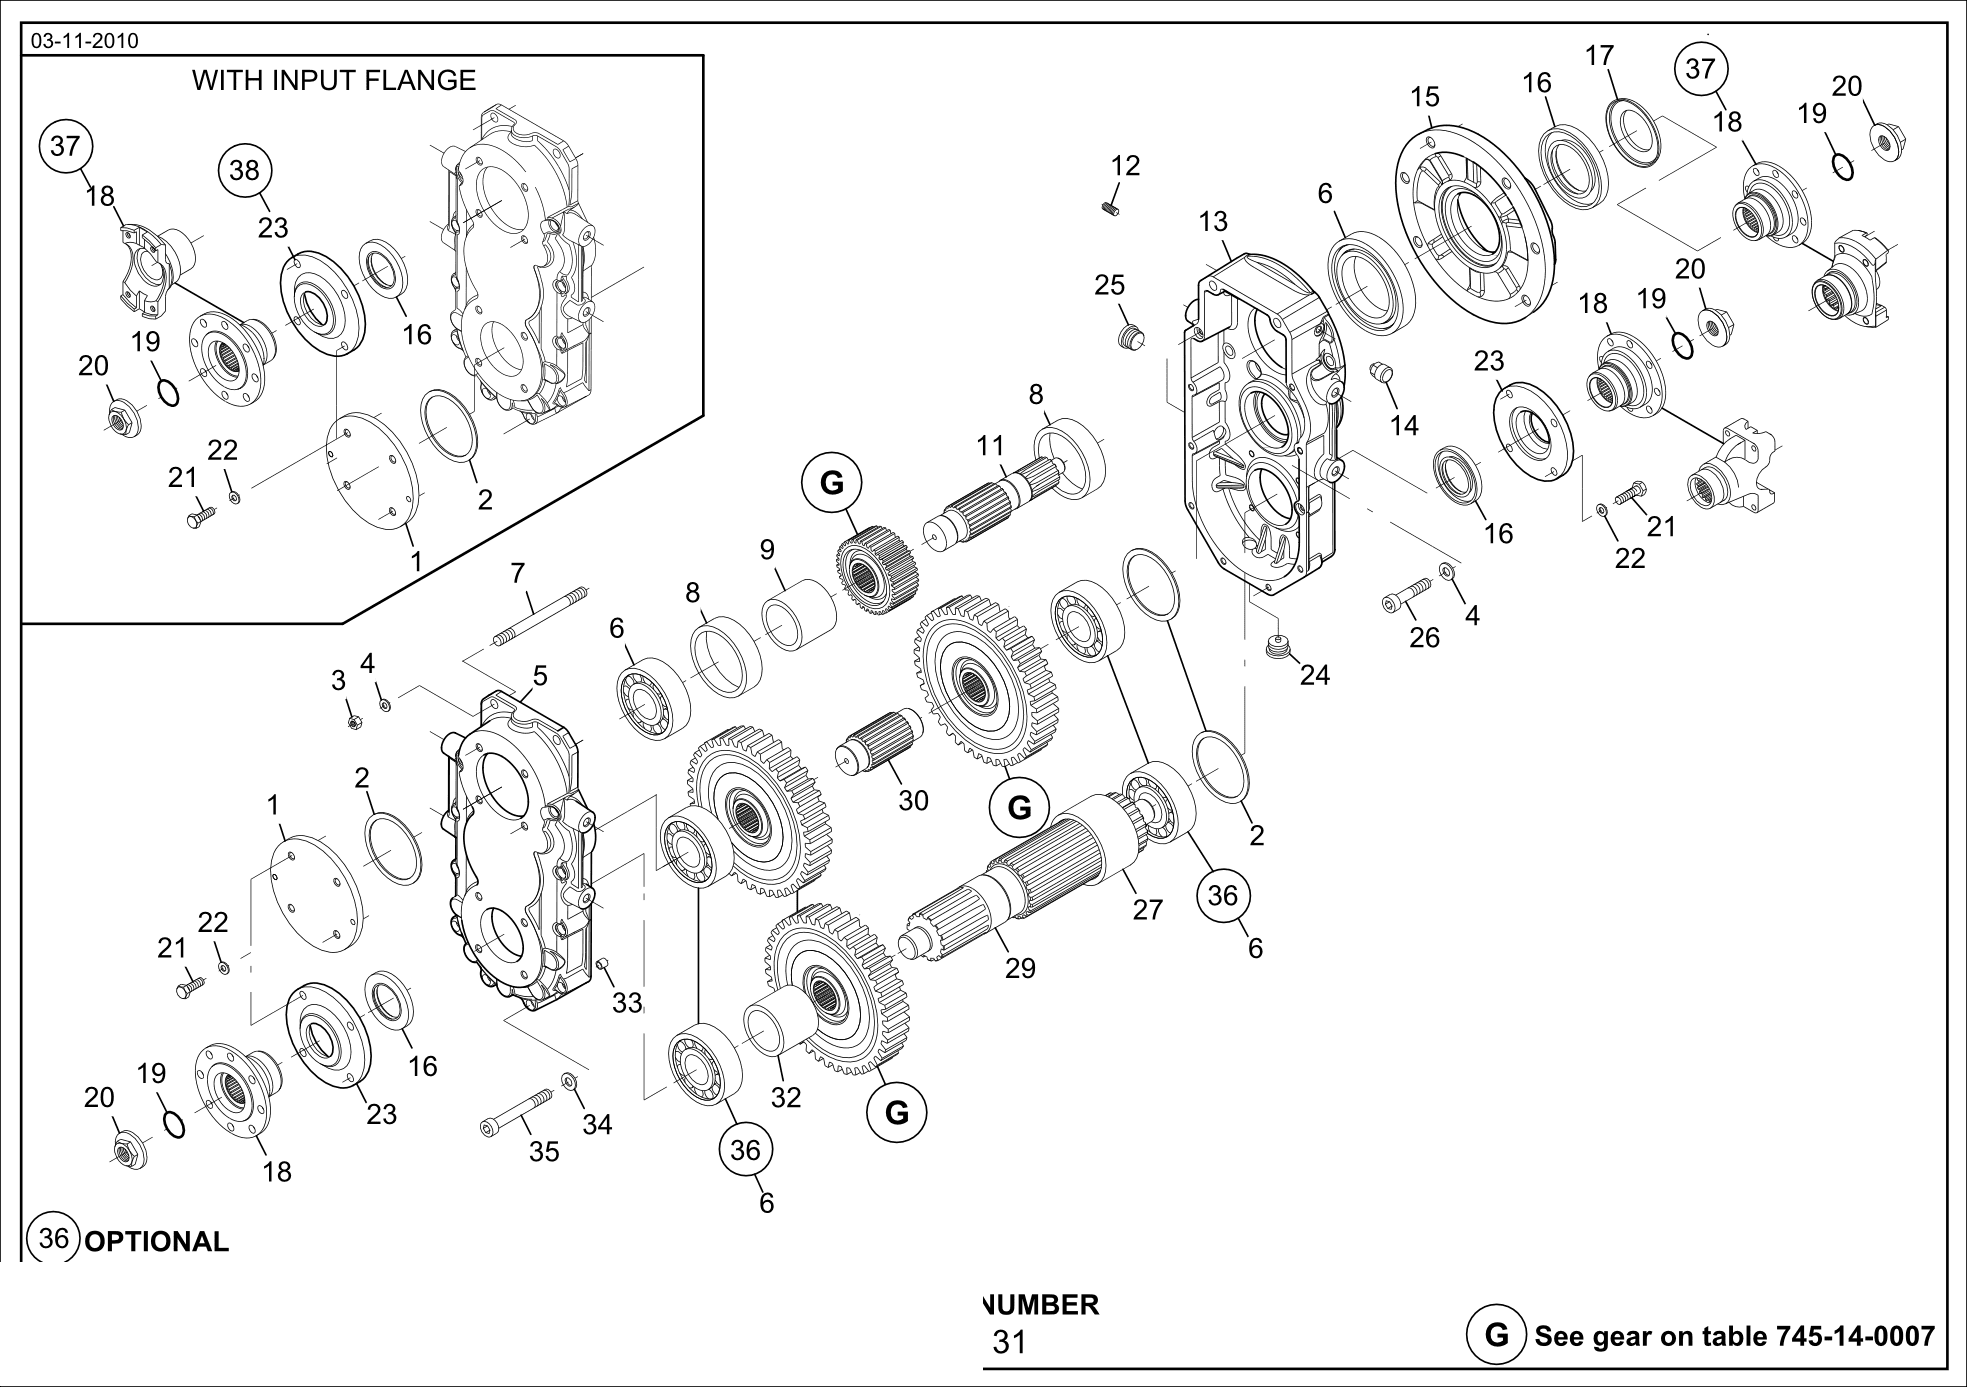 drawing for CATERPILLAR 015424-1-12 - VENT (figure 3)